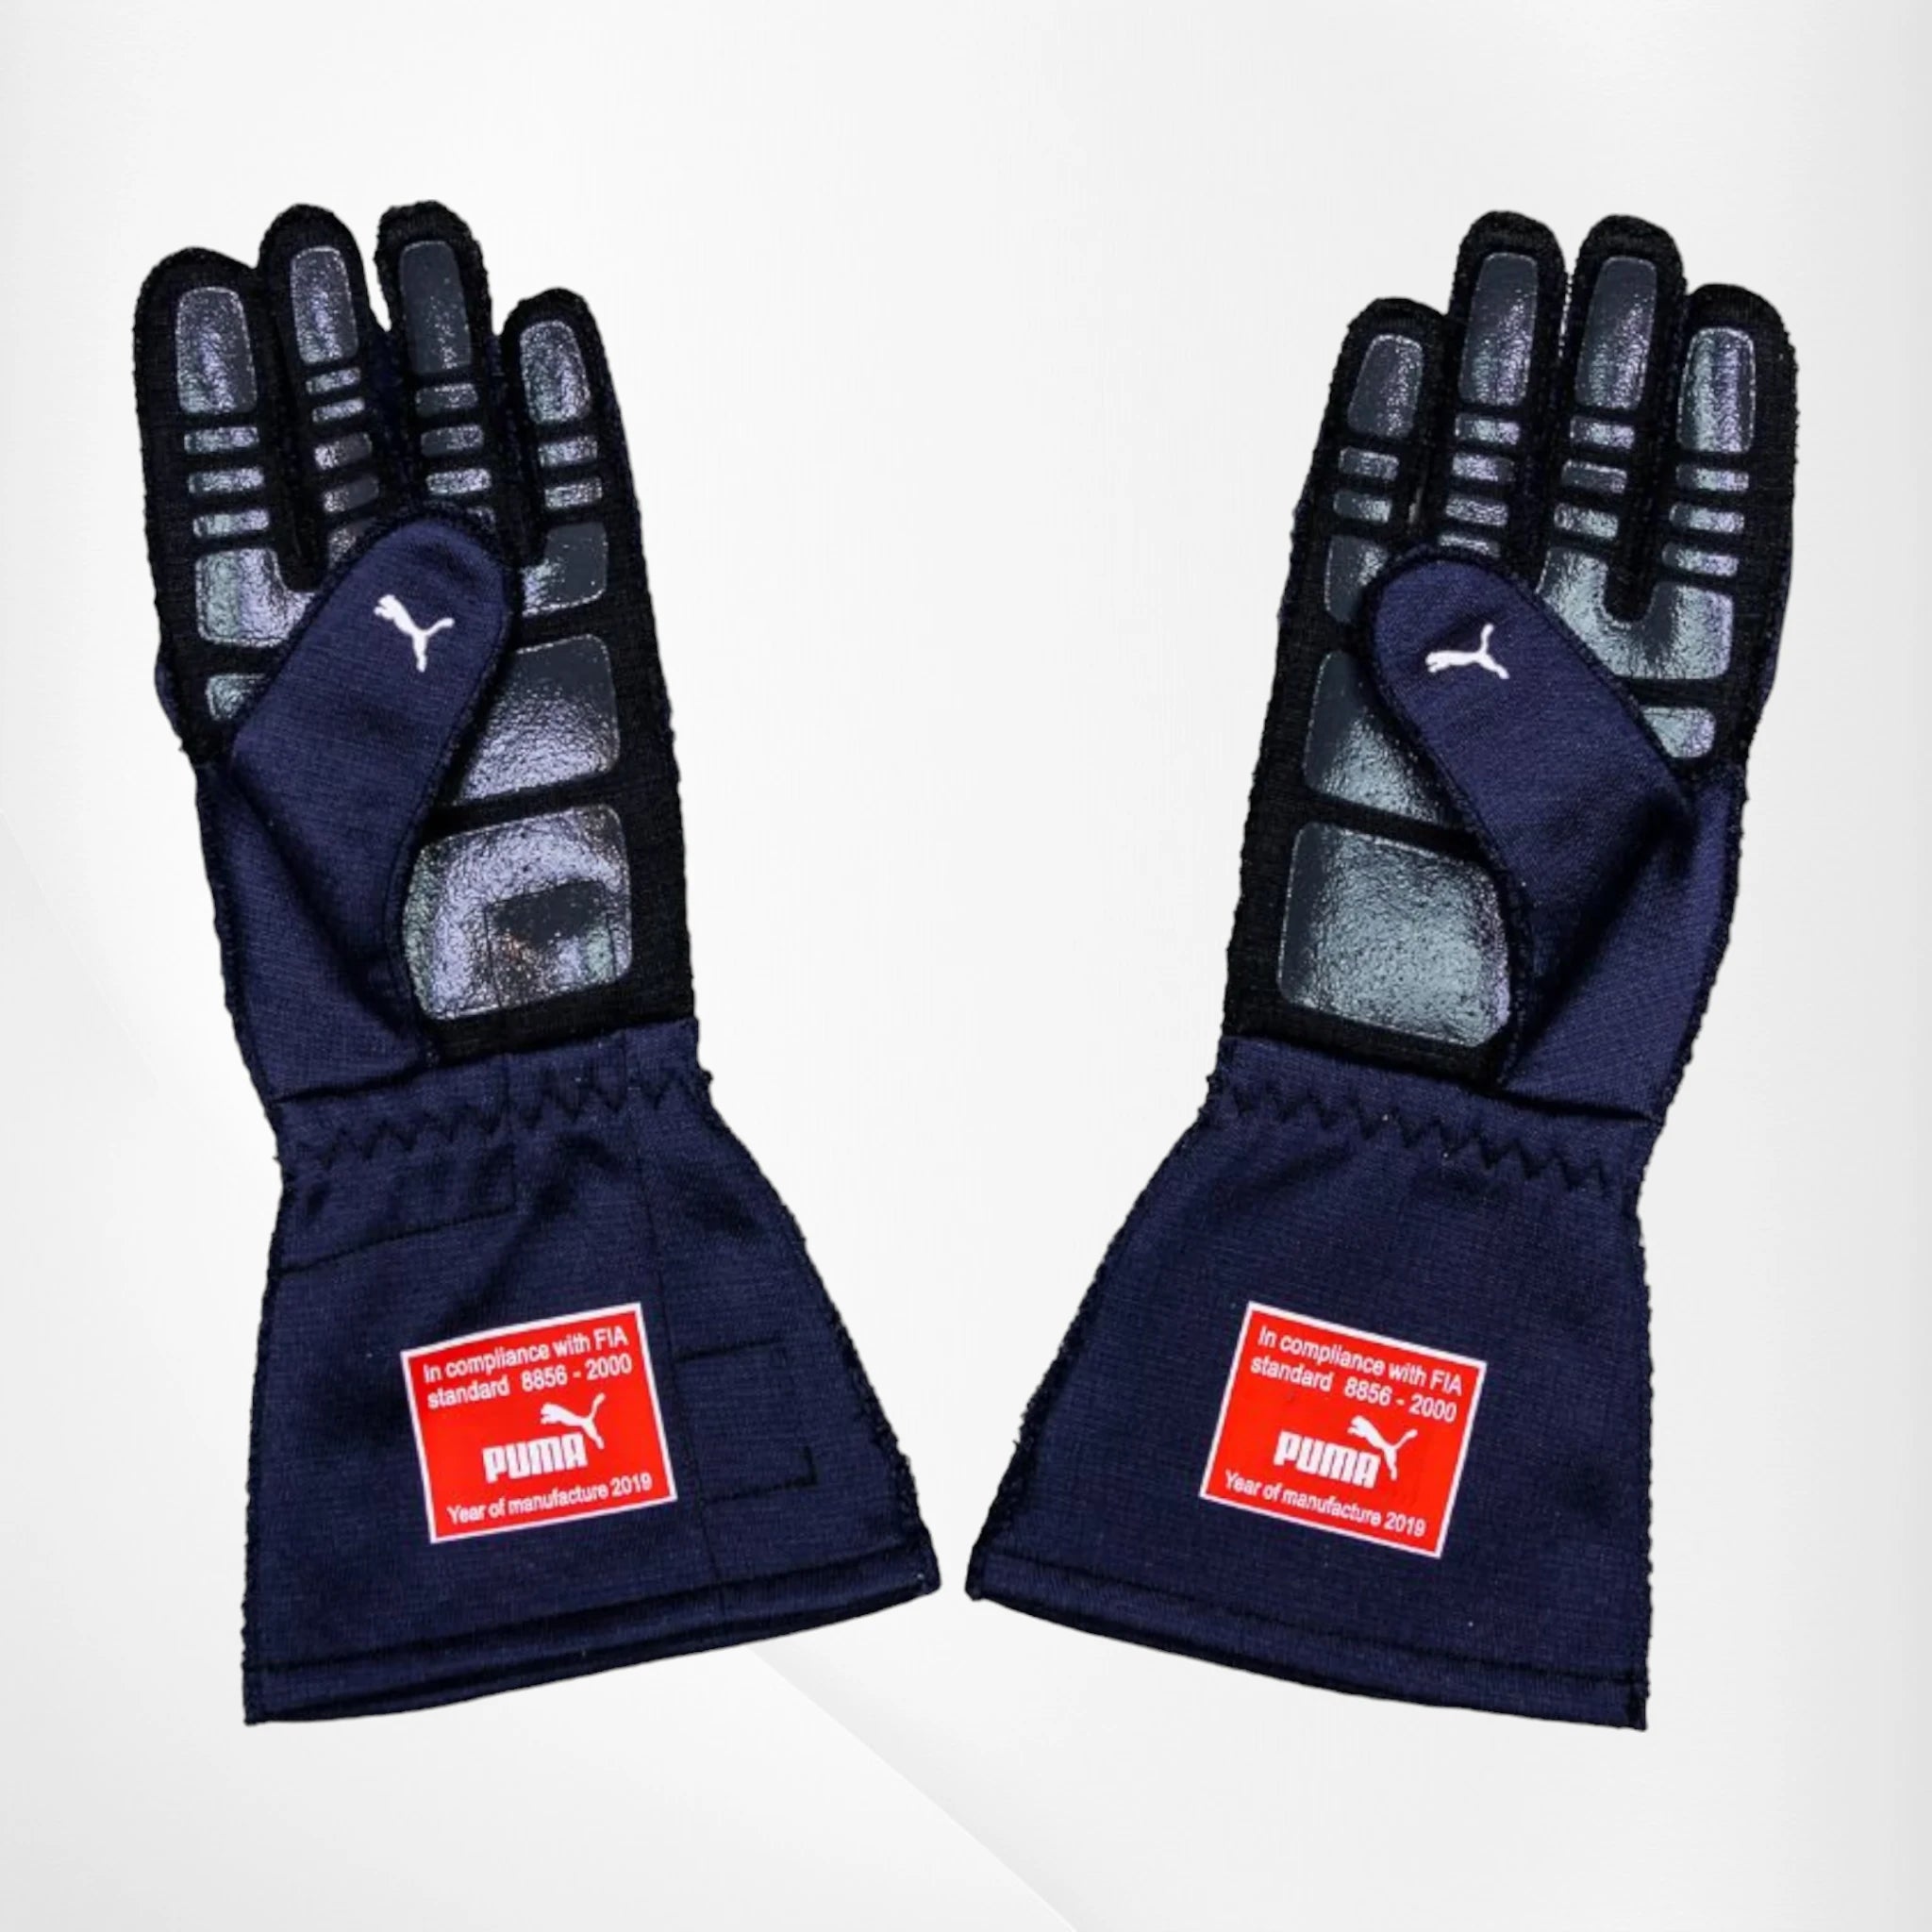 2019 Red Bull Pierre Gasly F1 Race Gloves